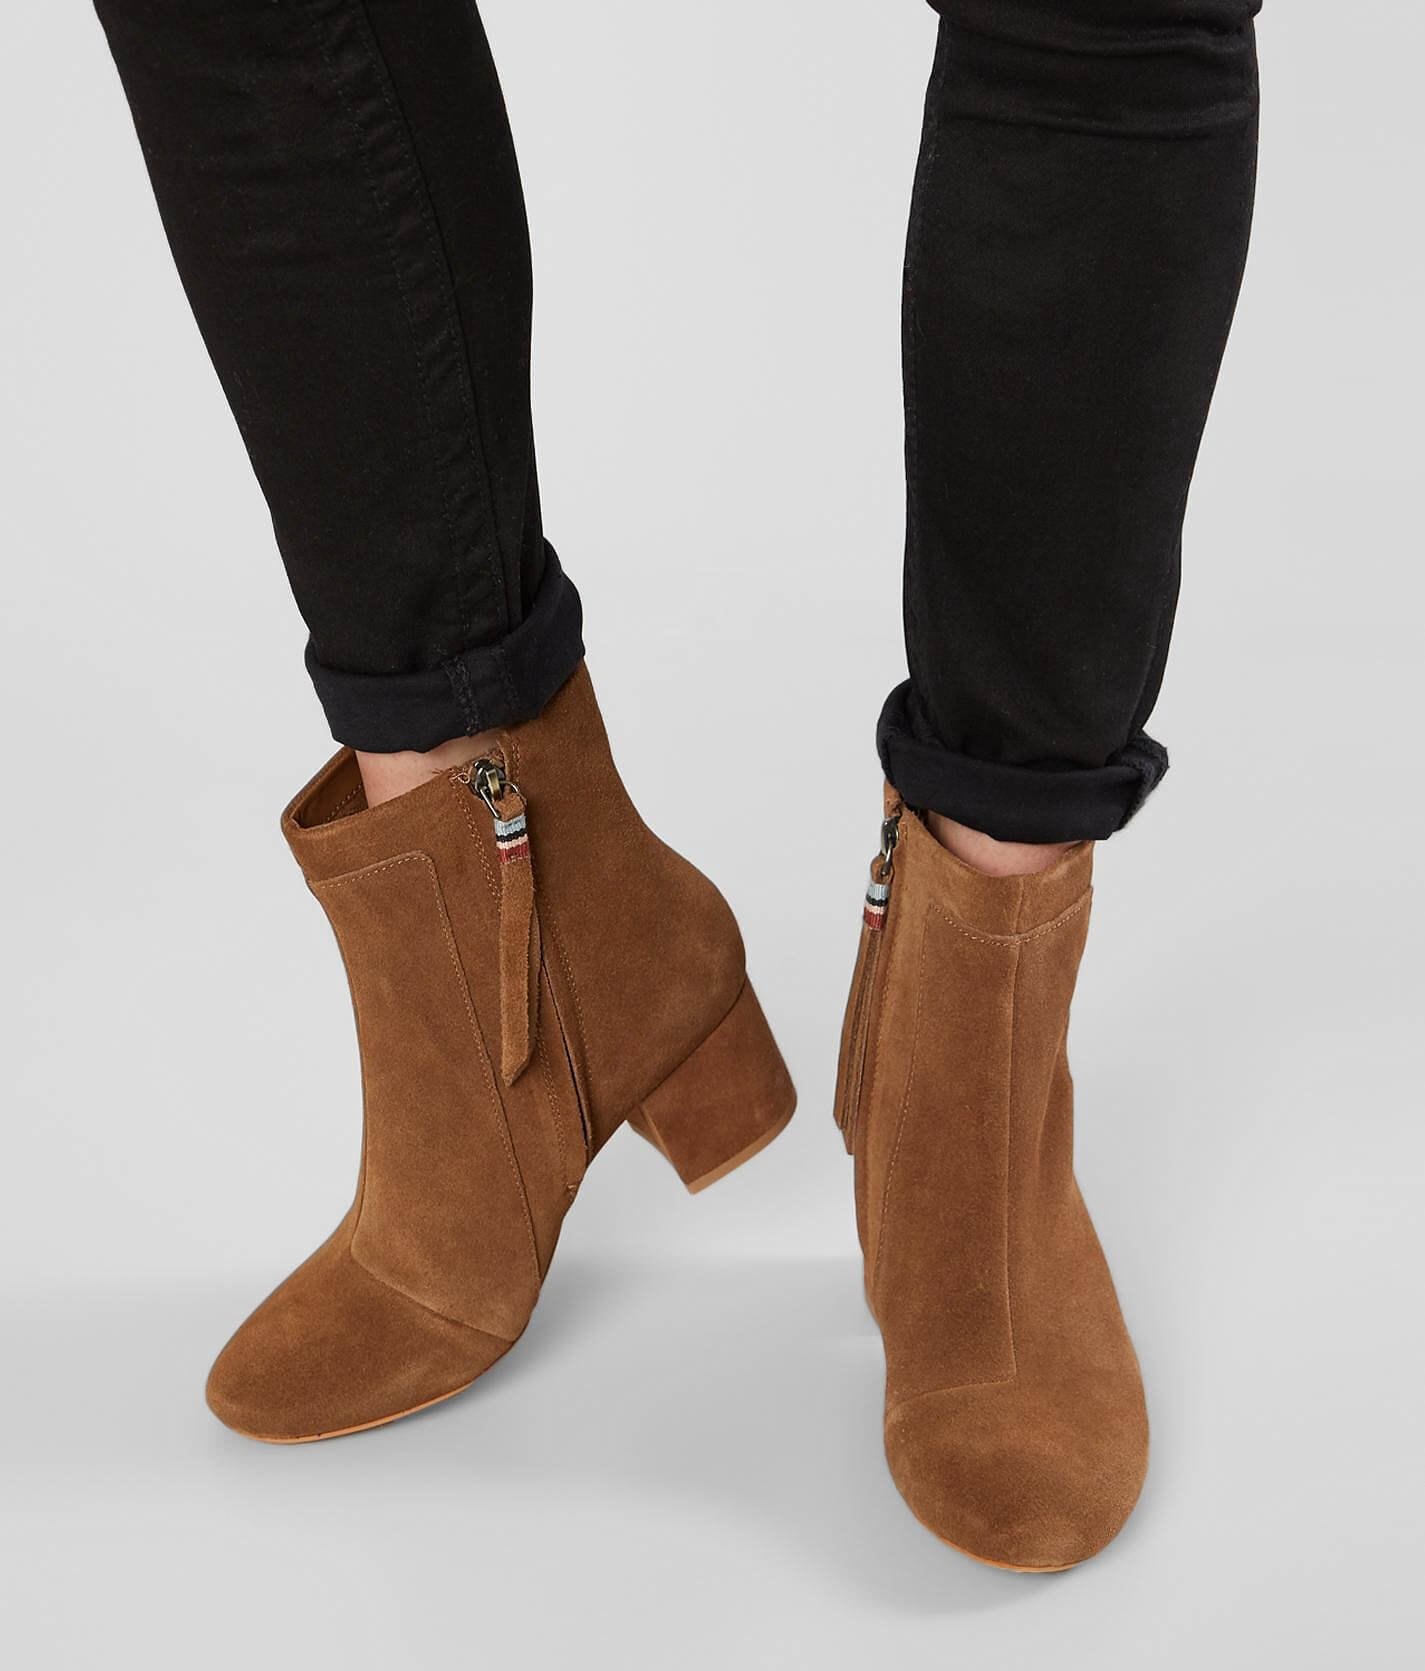 TOMS Evie Suede Ankle Boot - Women's 